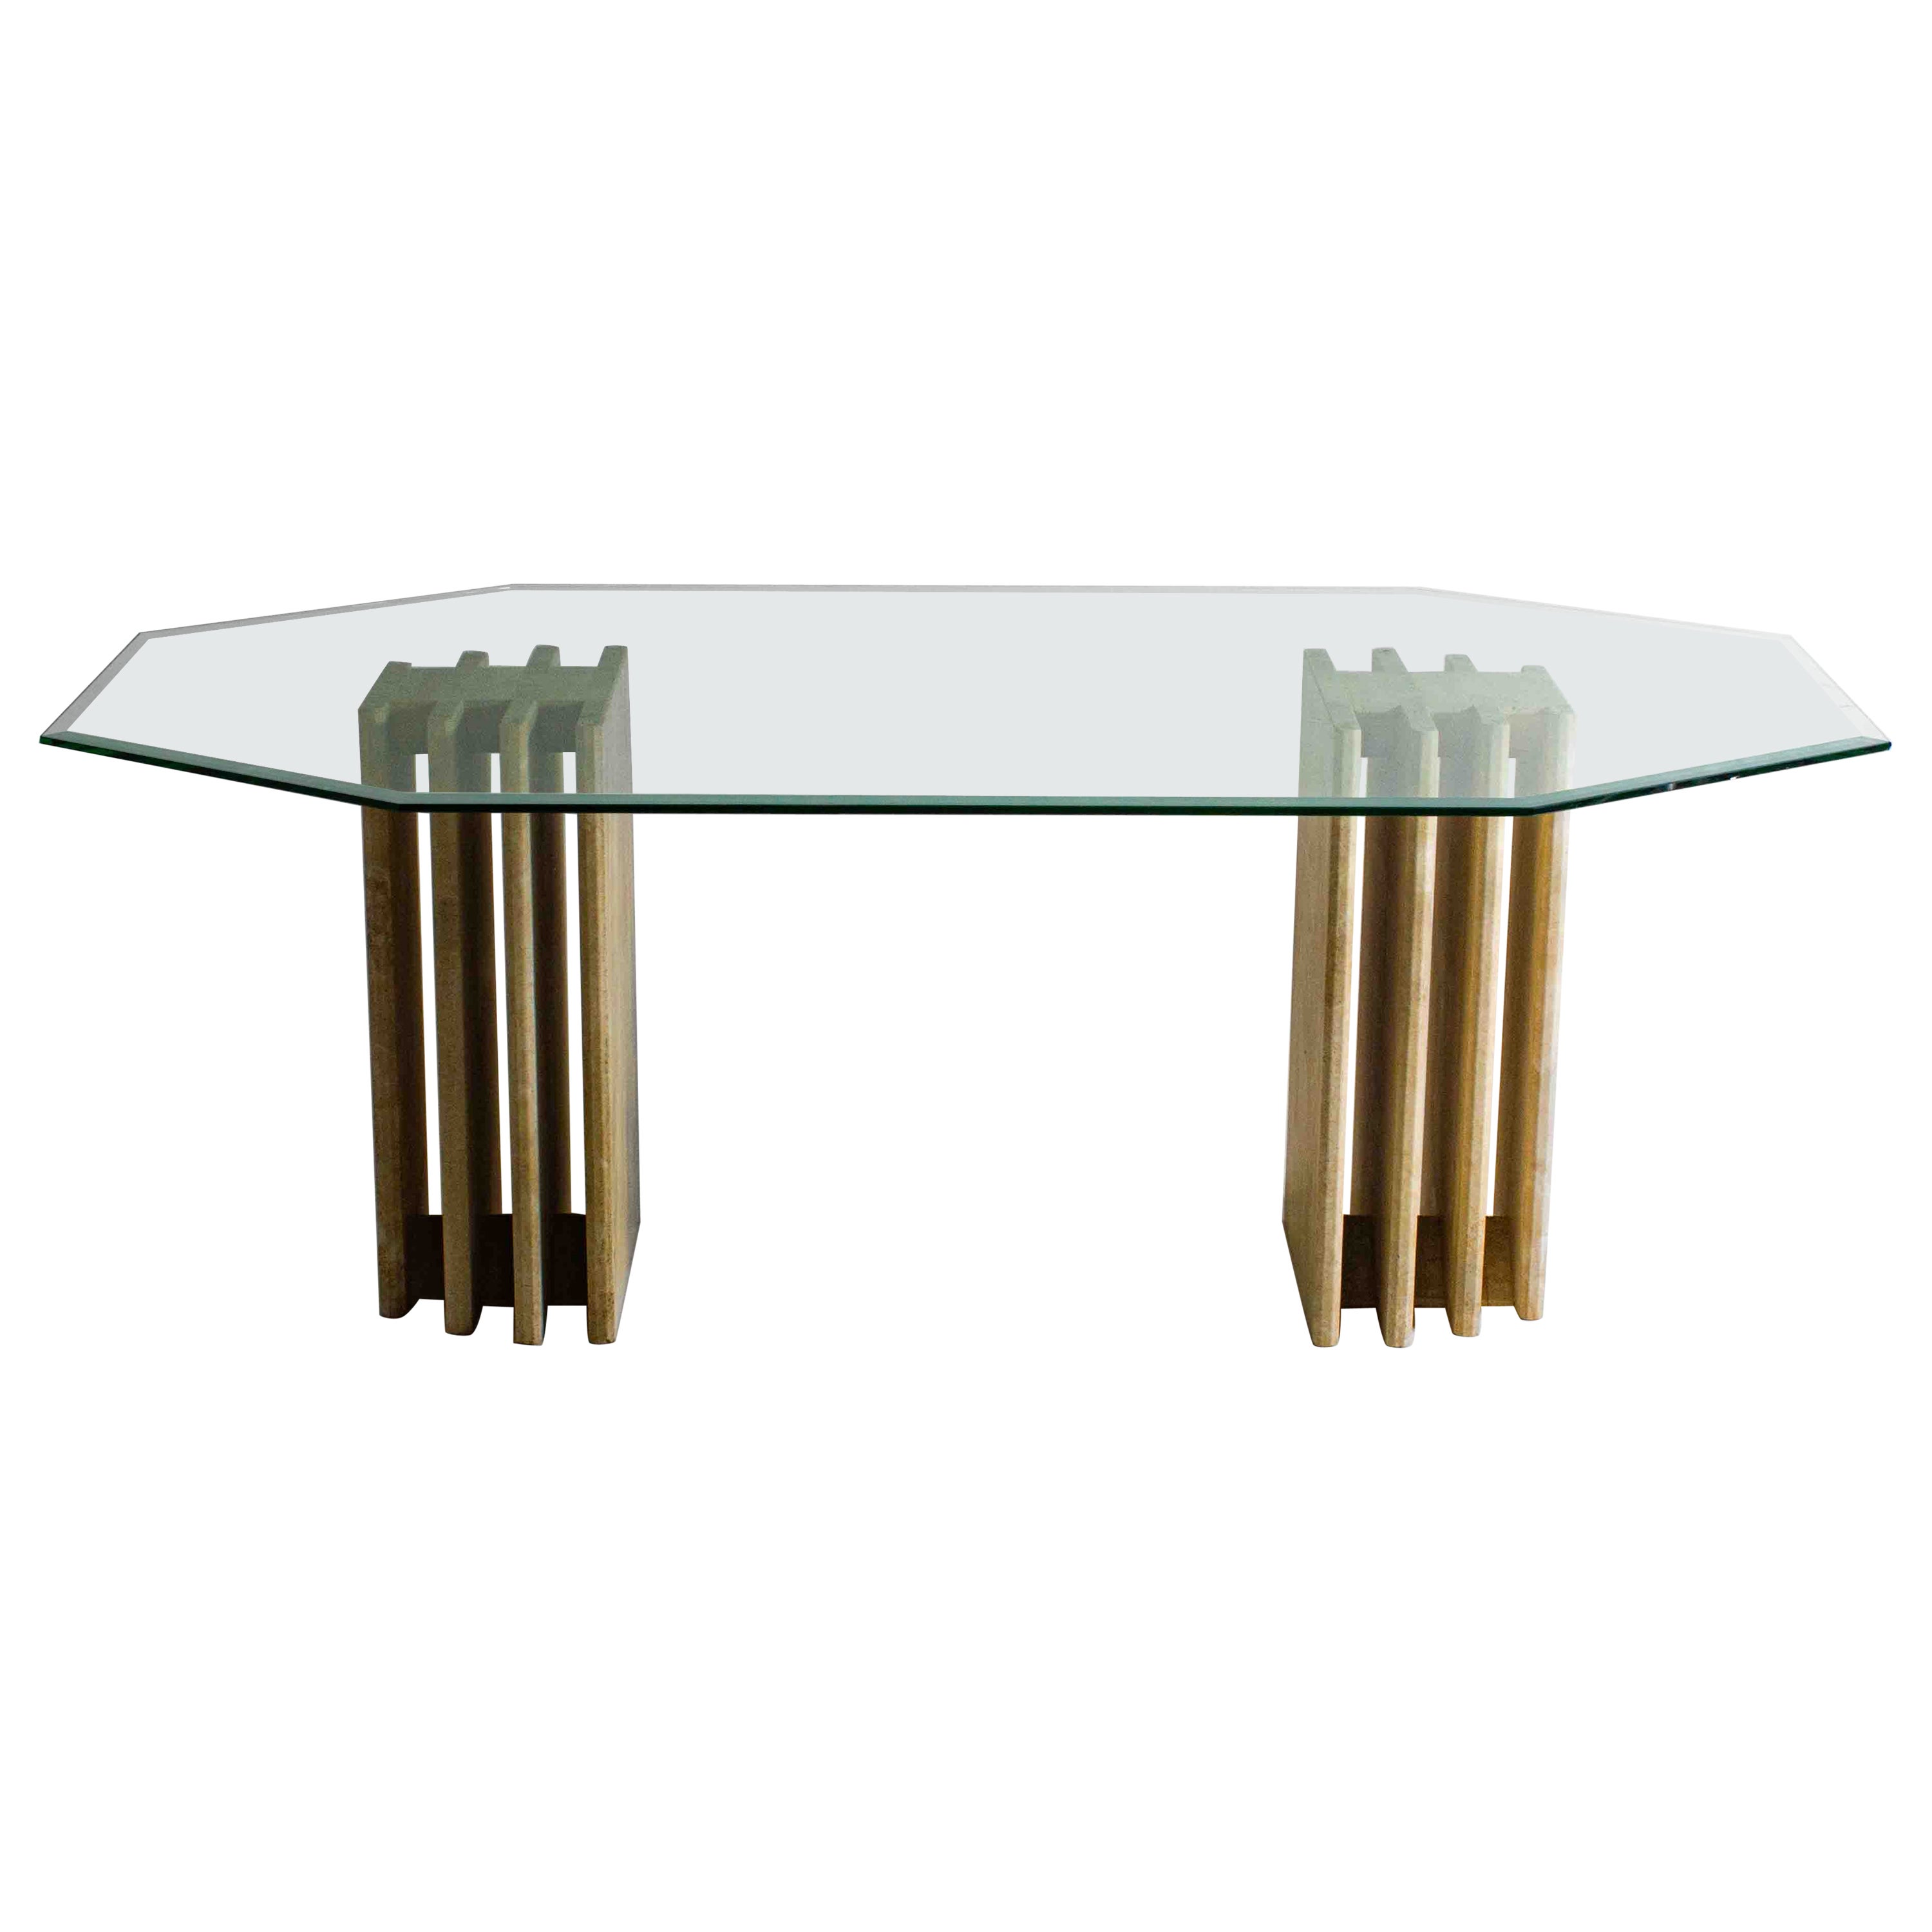 Architectural travertine dining table with glass top, Italy 1970s For Sale